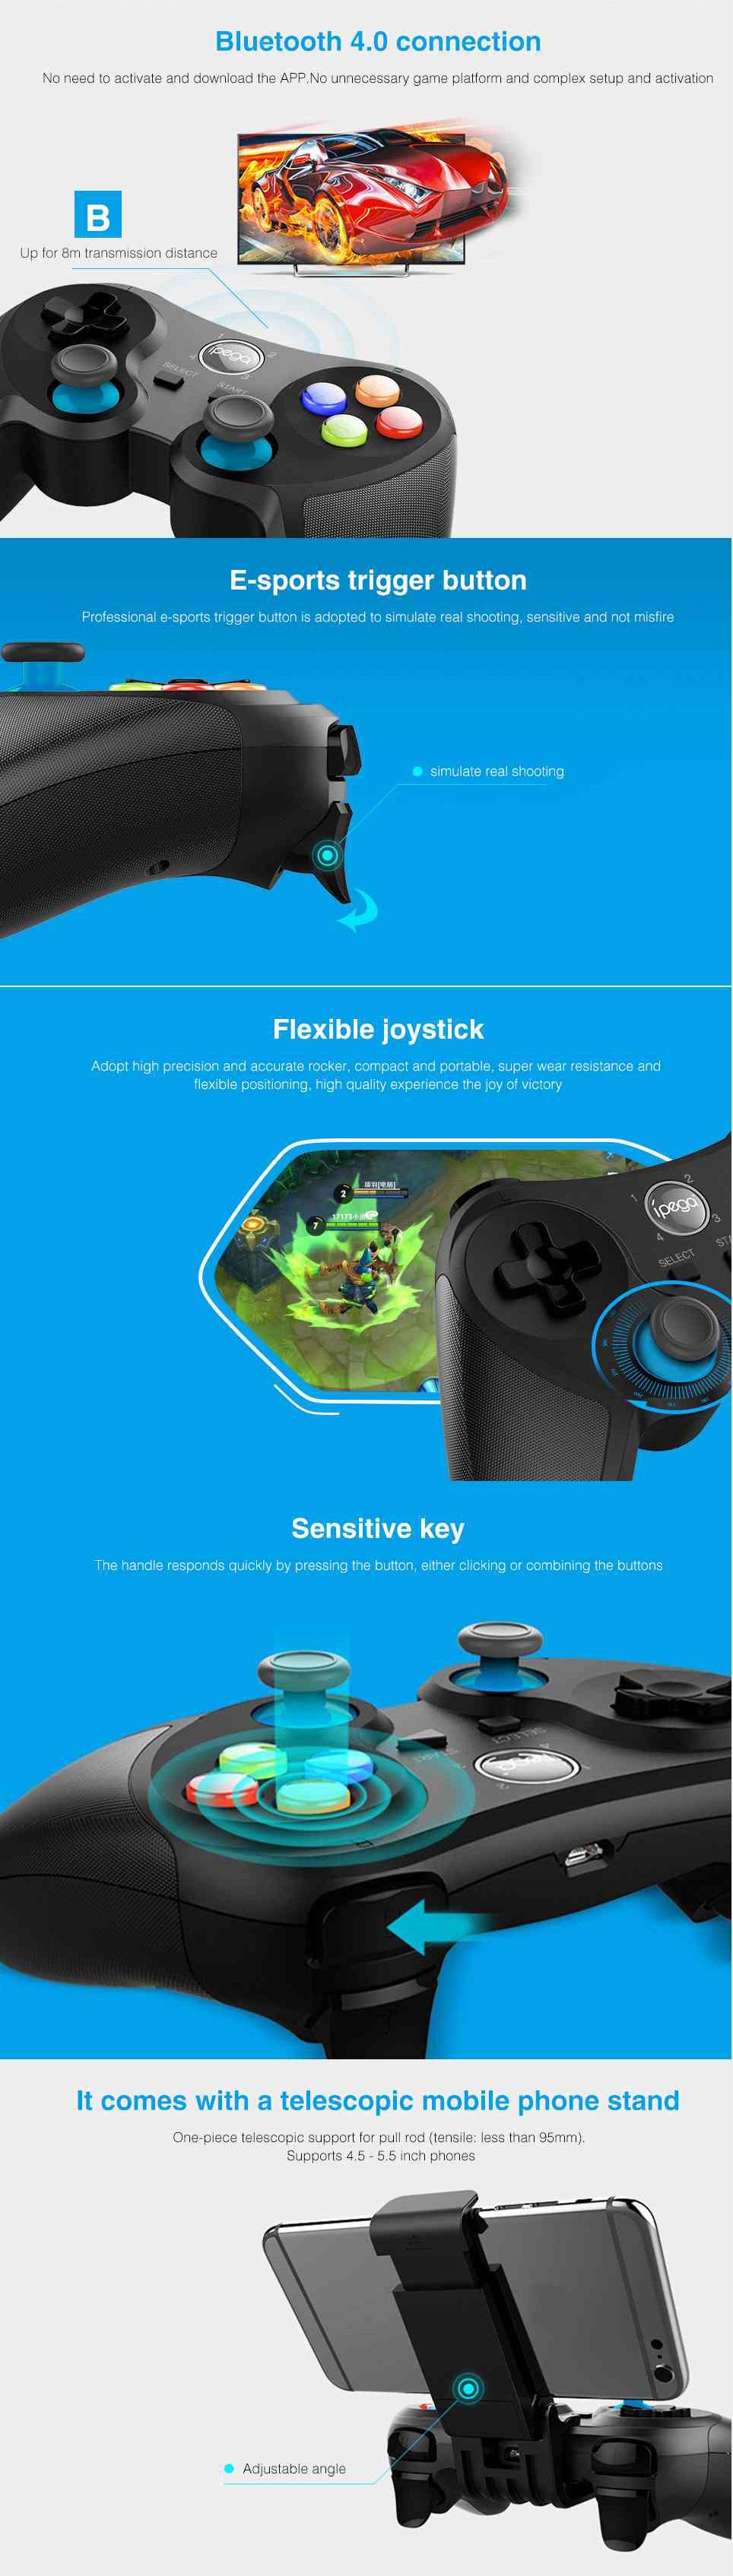 IPEGA-PG-9157-bluetooth-Wireless-Game-Controller-Remote-Gamepad-Joystick-For-iOS-Android-Devices-1748388